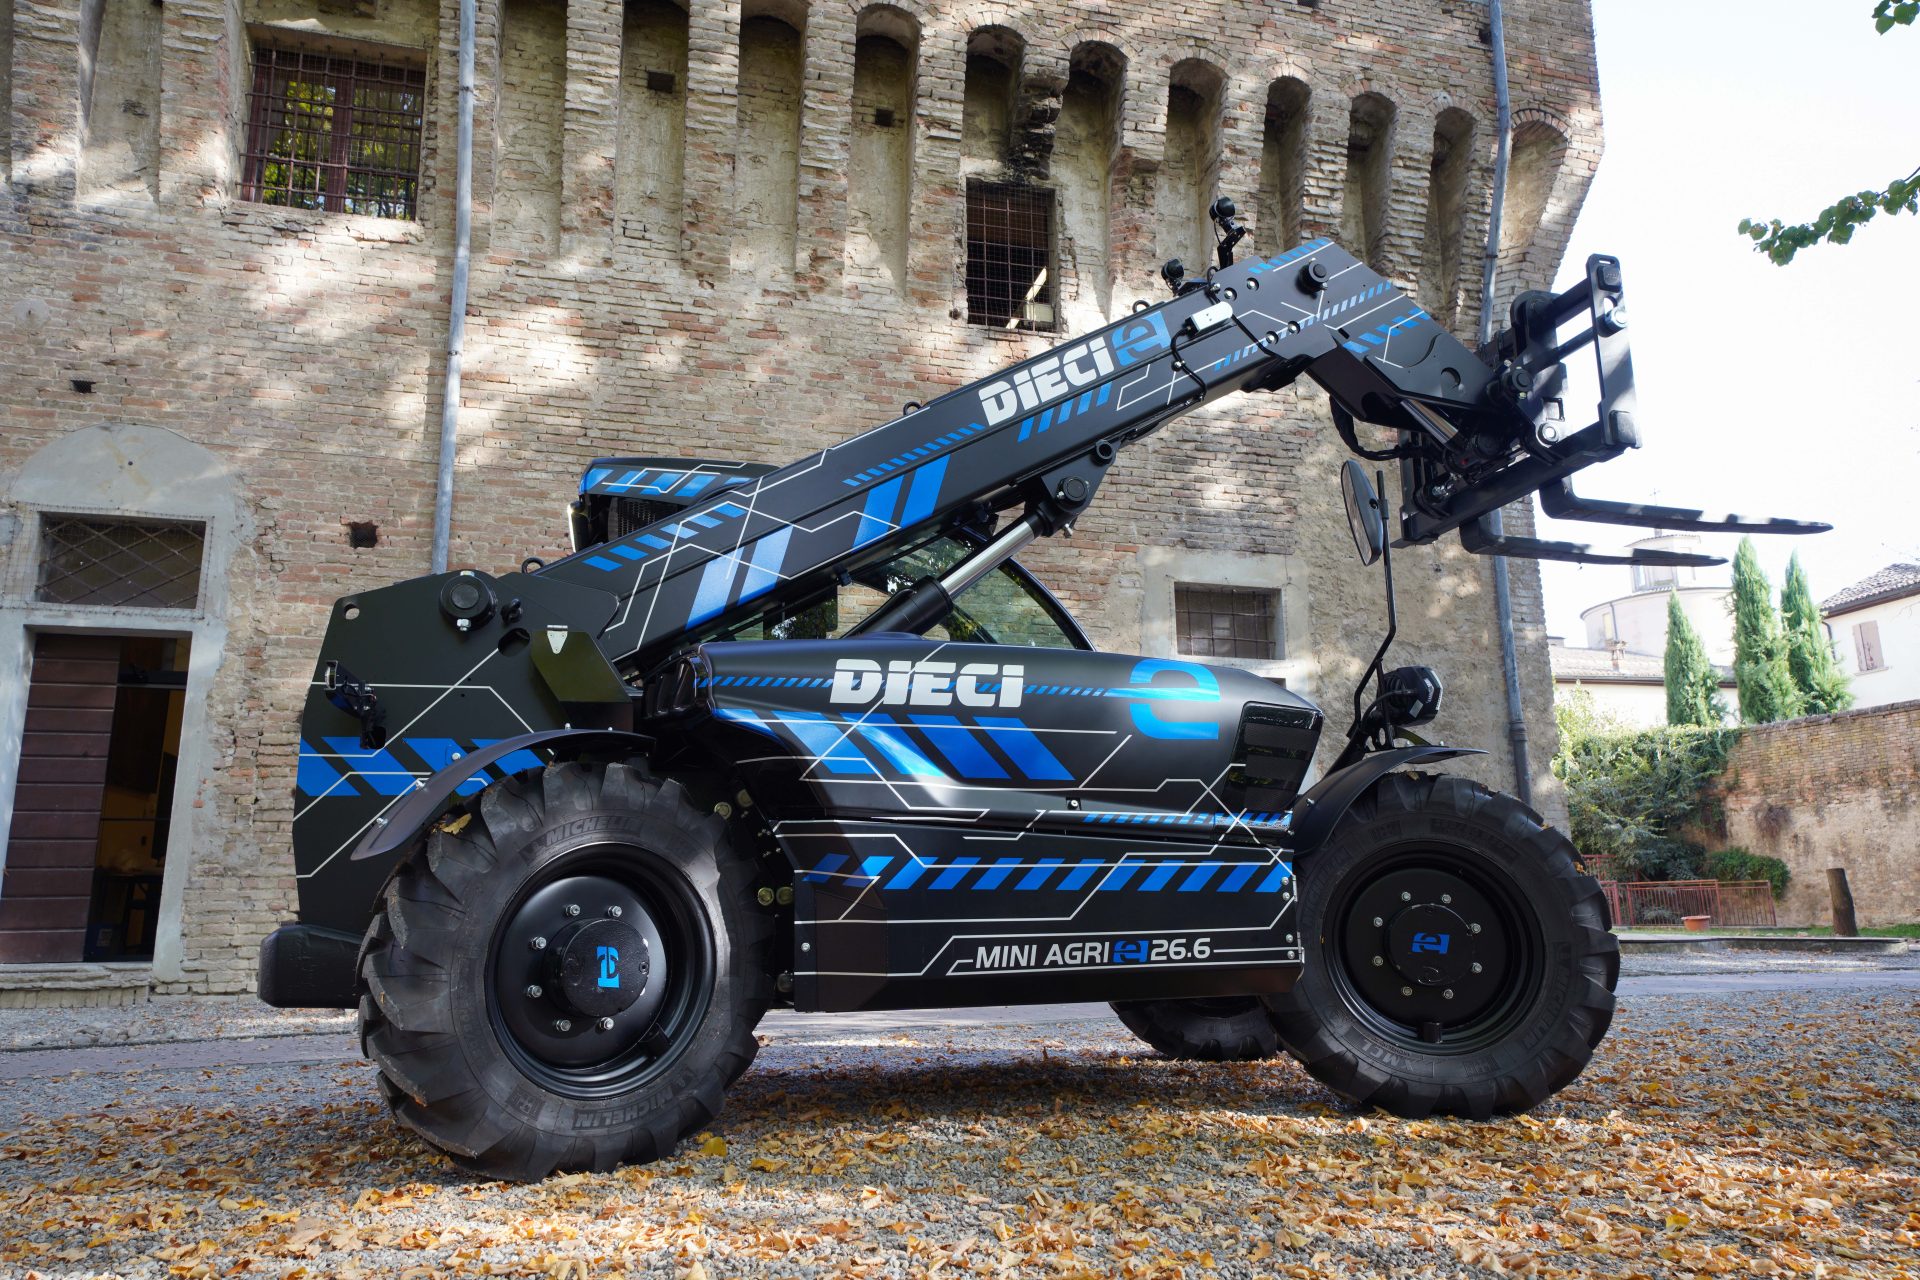 First electric Dieci telehandler at Agritechnica